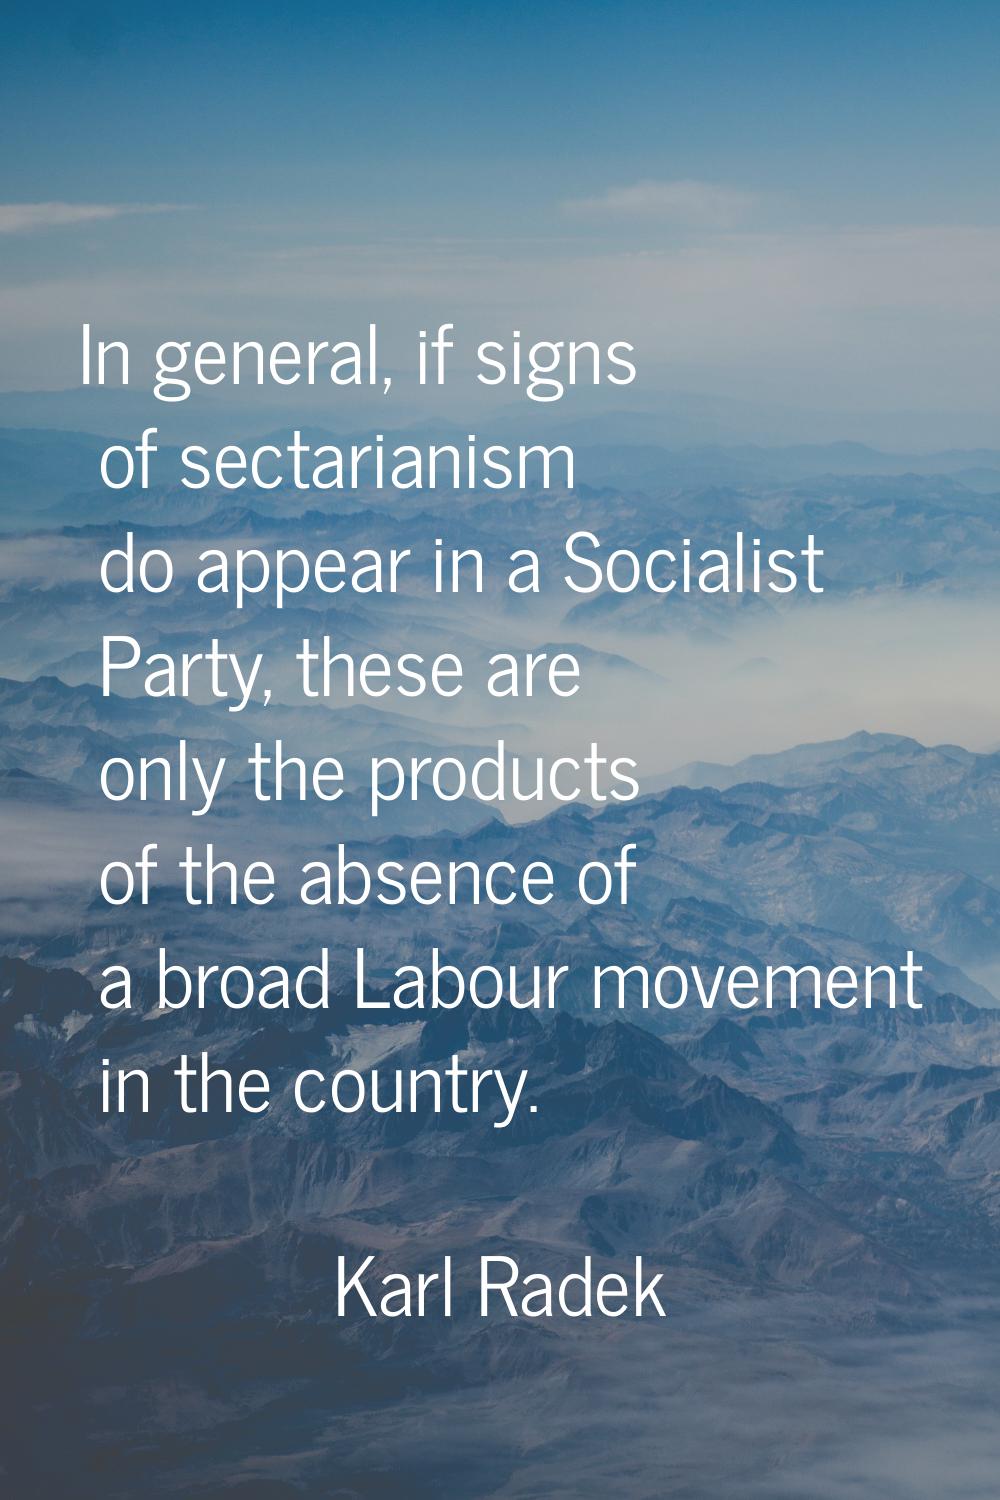 In general, if signs of sectarianism do appear in a Socialist Party, these are only the products of